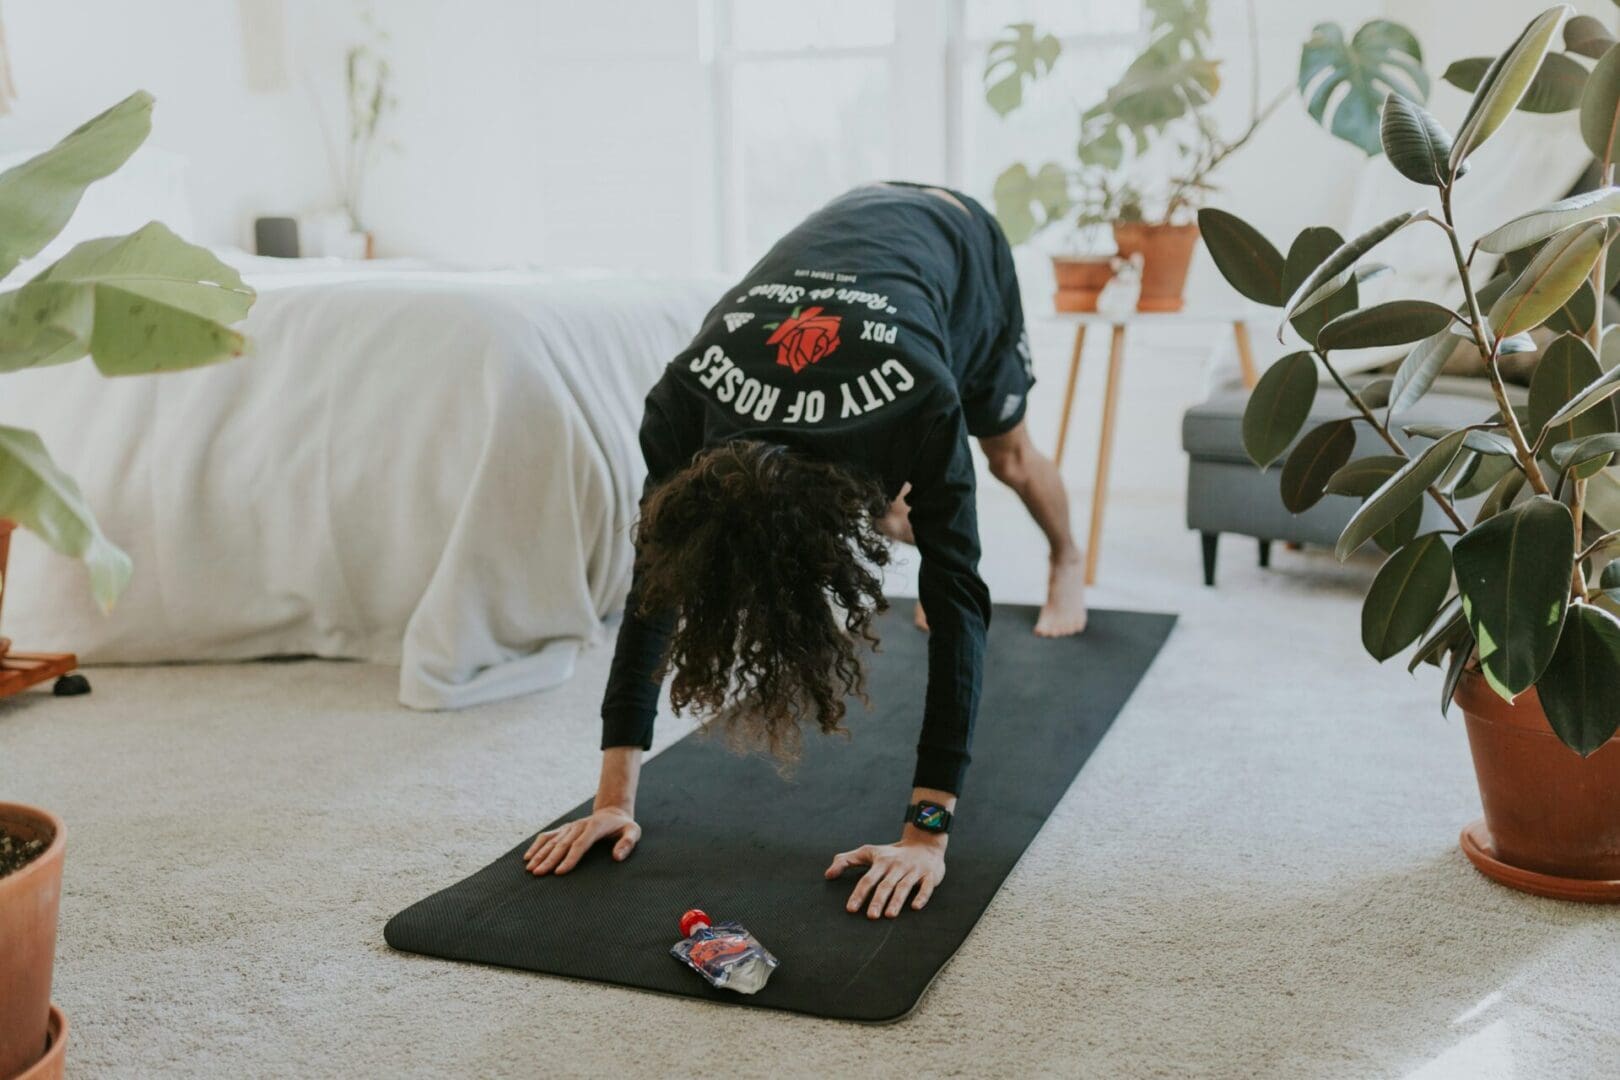 A person doing yoga on the floor in their living room.